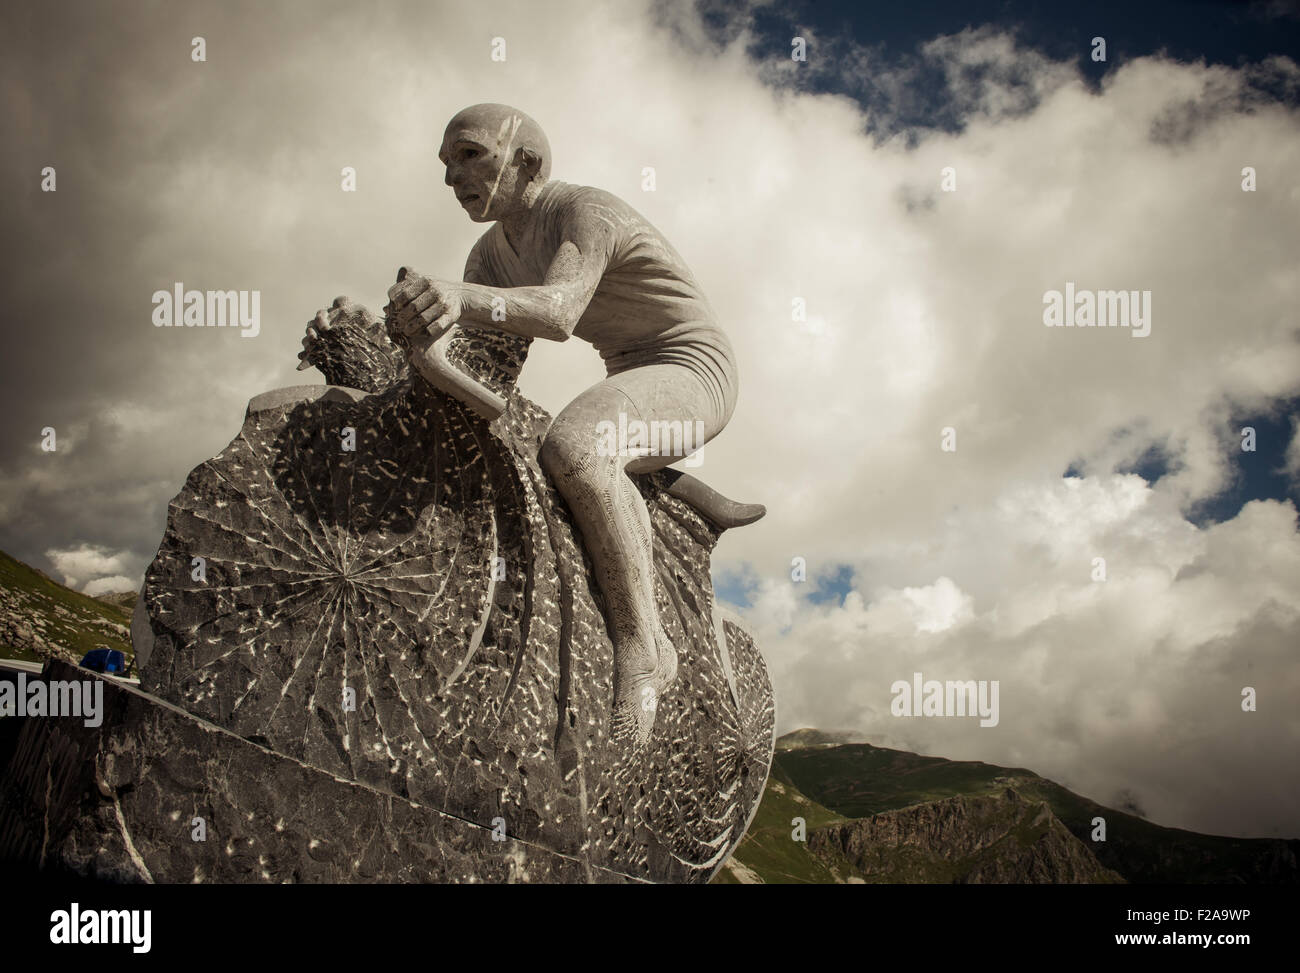 Statue of famous Italian cycle racer Marco Pantani at the top of the Colle Fauniera in the Italian Alps. Stock Photo